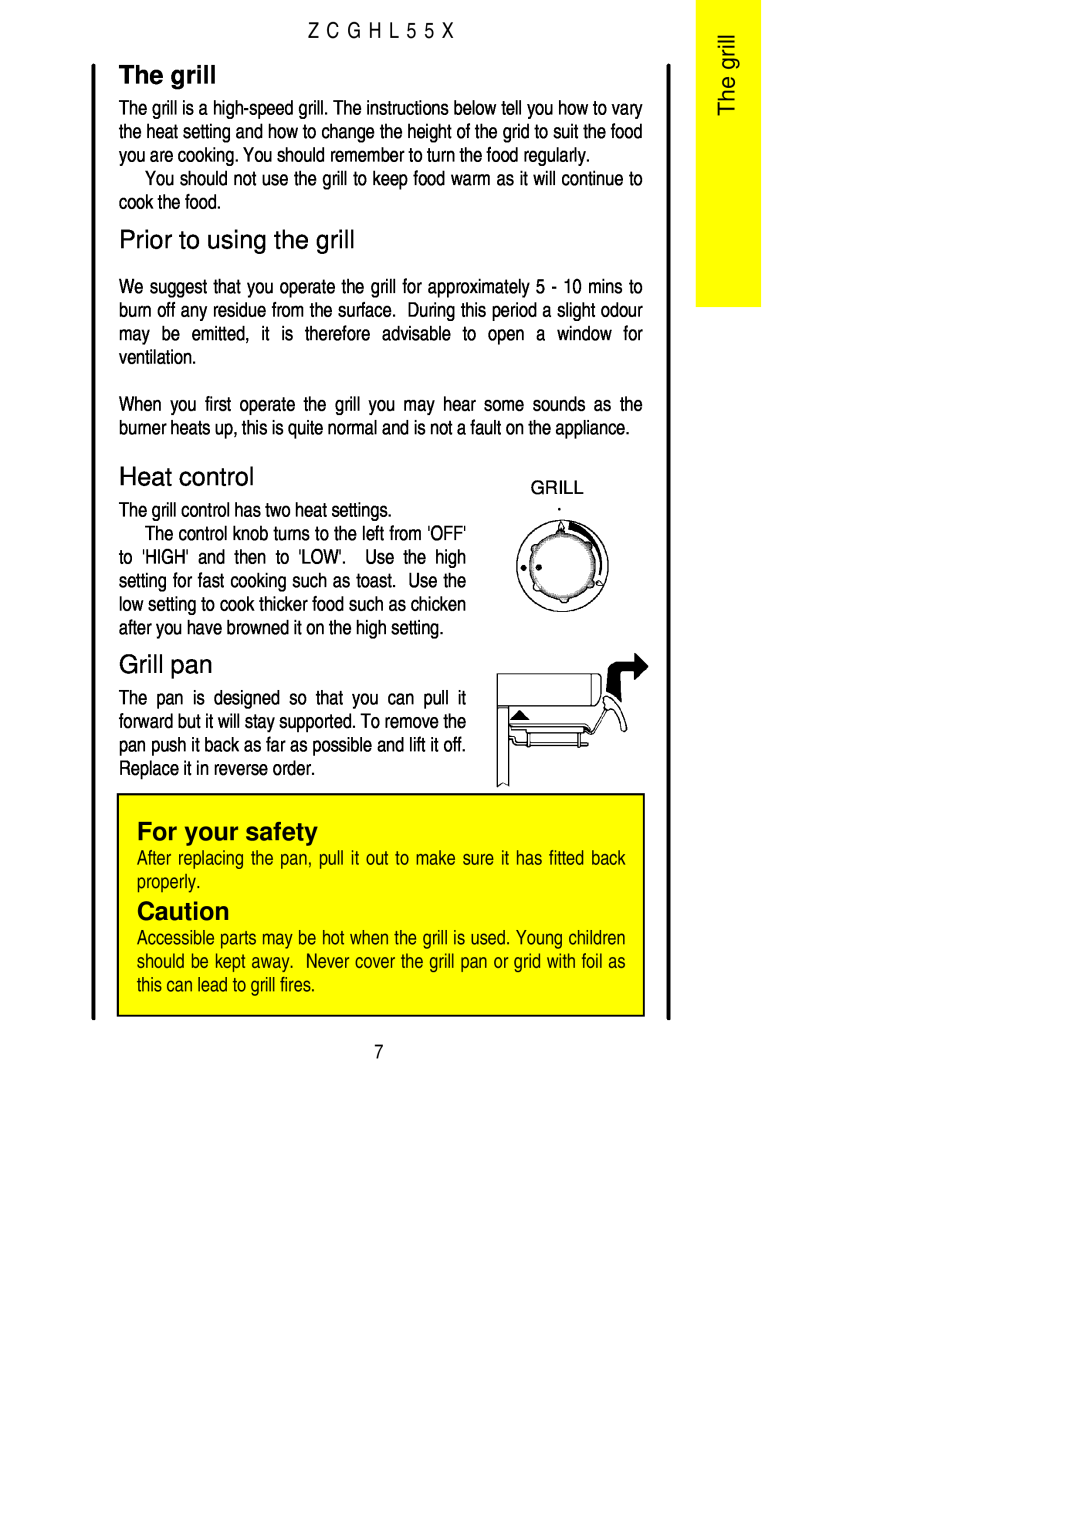 Zanussi ZCGHL55X manual The grill, Prior to using the grill, Heat control, Grill pan, For your safety, Z C G H L 